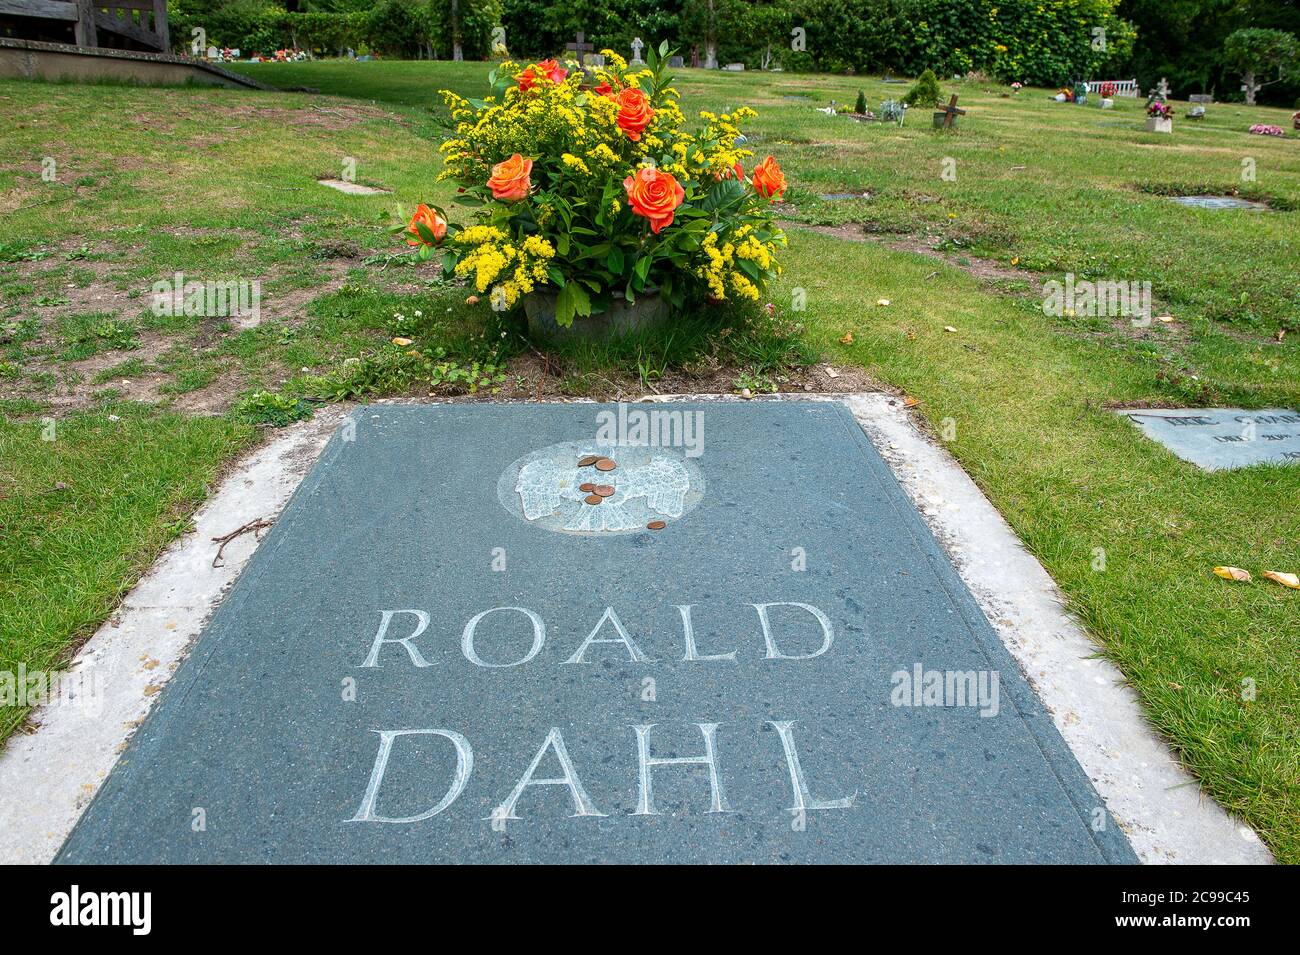 Great Missenden, Buckinghamshire, UK. 28th July, 2020. Although the Roald Dahl Museum in Great Missenden is currently closed, visitors are still able to see the grave of author Roald Dahl in the village churchyard. Credit: Maureen McLean/Alamy Stock Photo